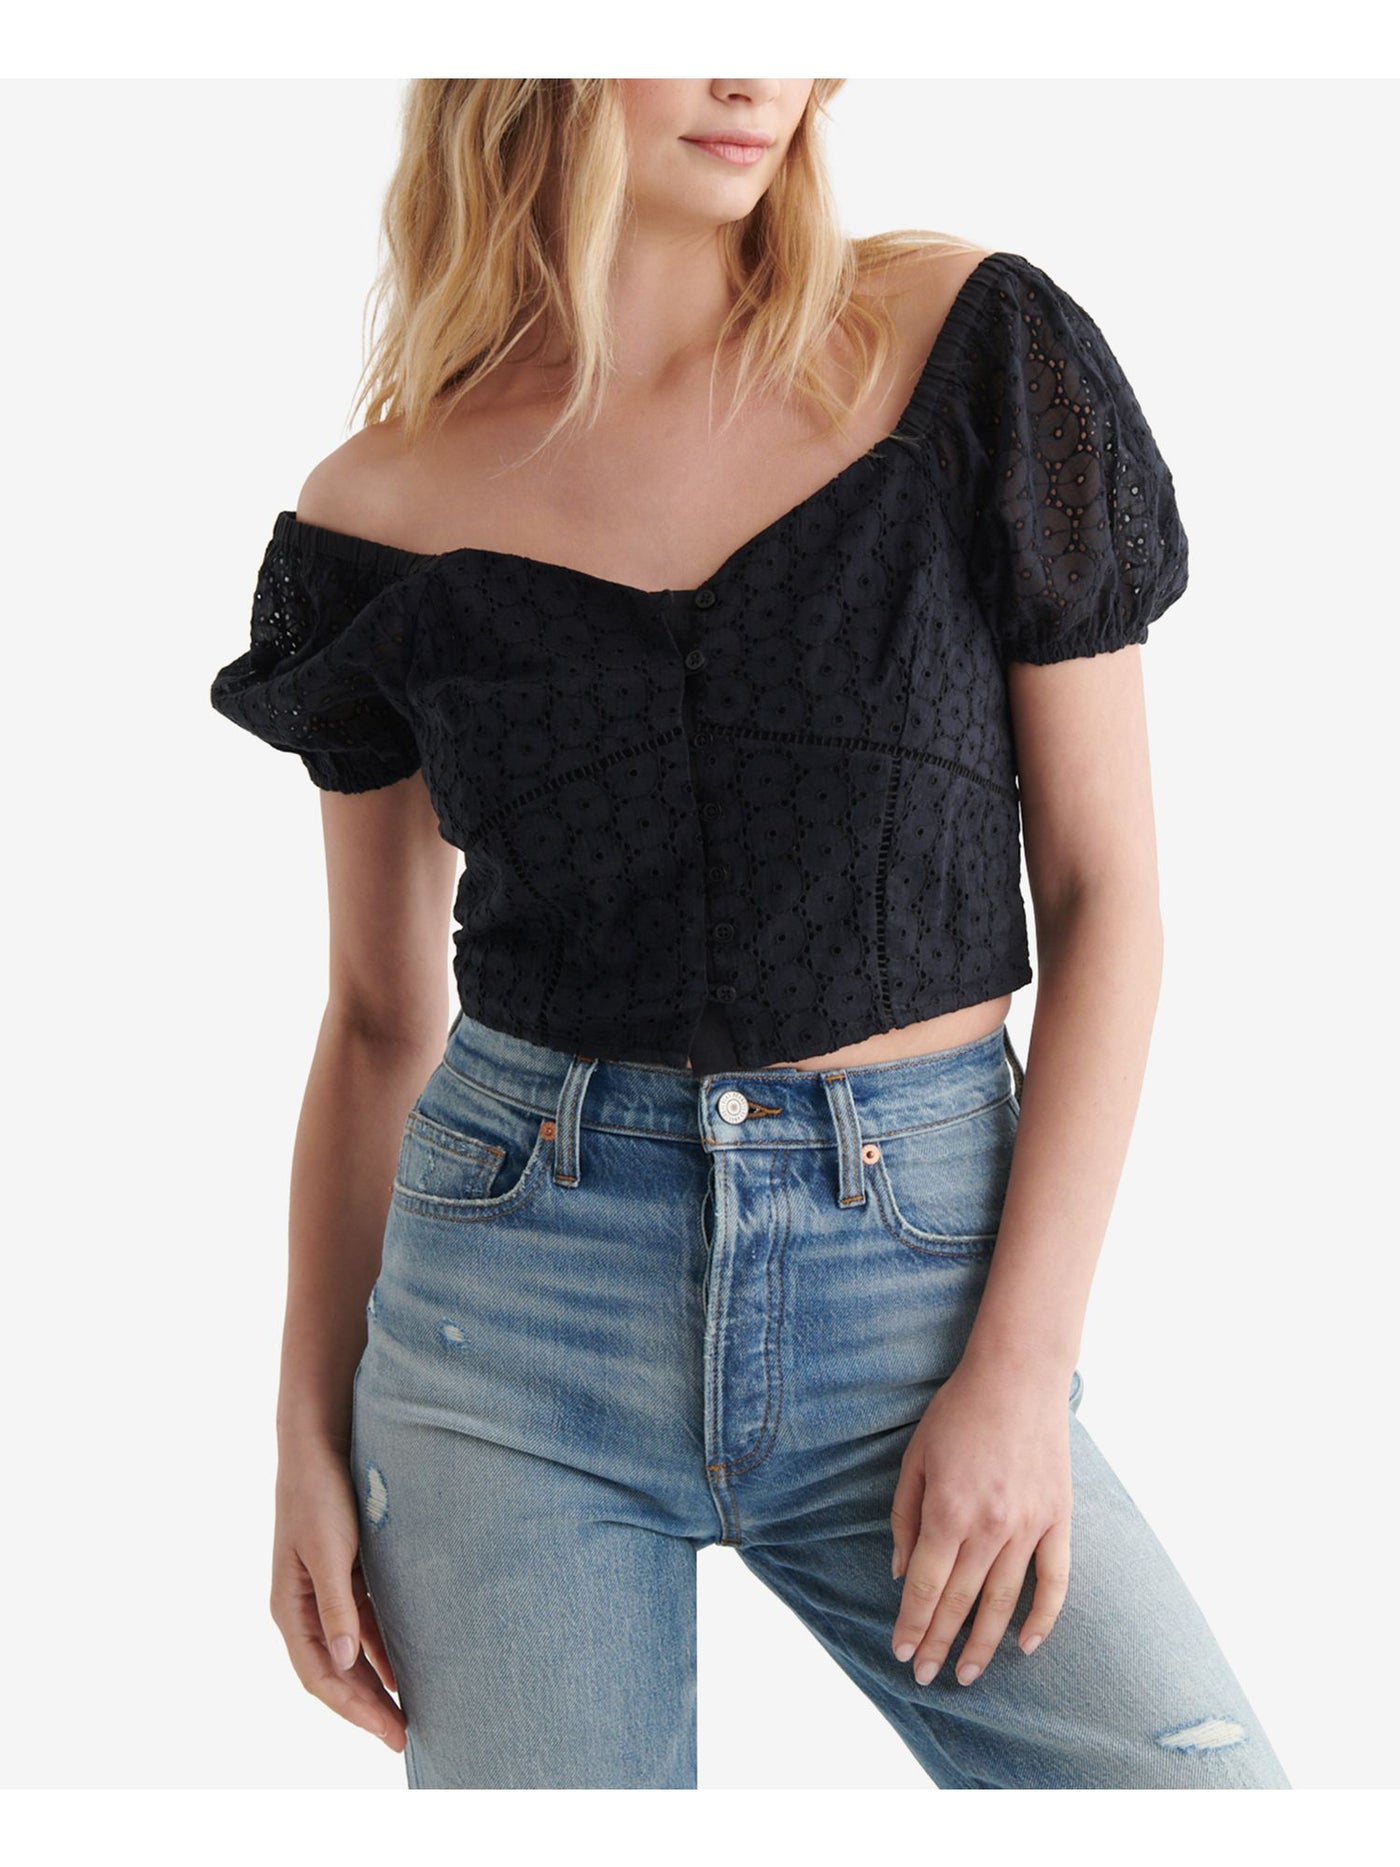 LUCKY BRAND Womens Black Eyelet Smocked Lace Button Front Closure Pouf Sleeve Sweetheart Neckline Crop Top XL